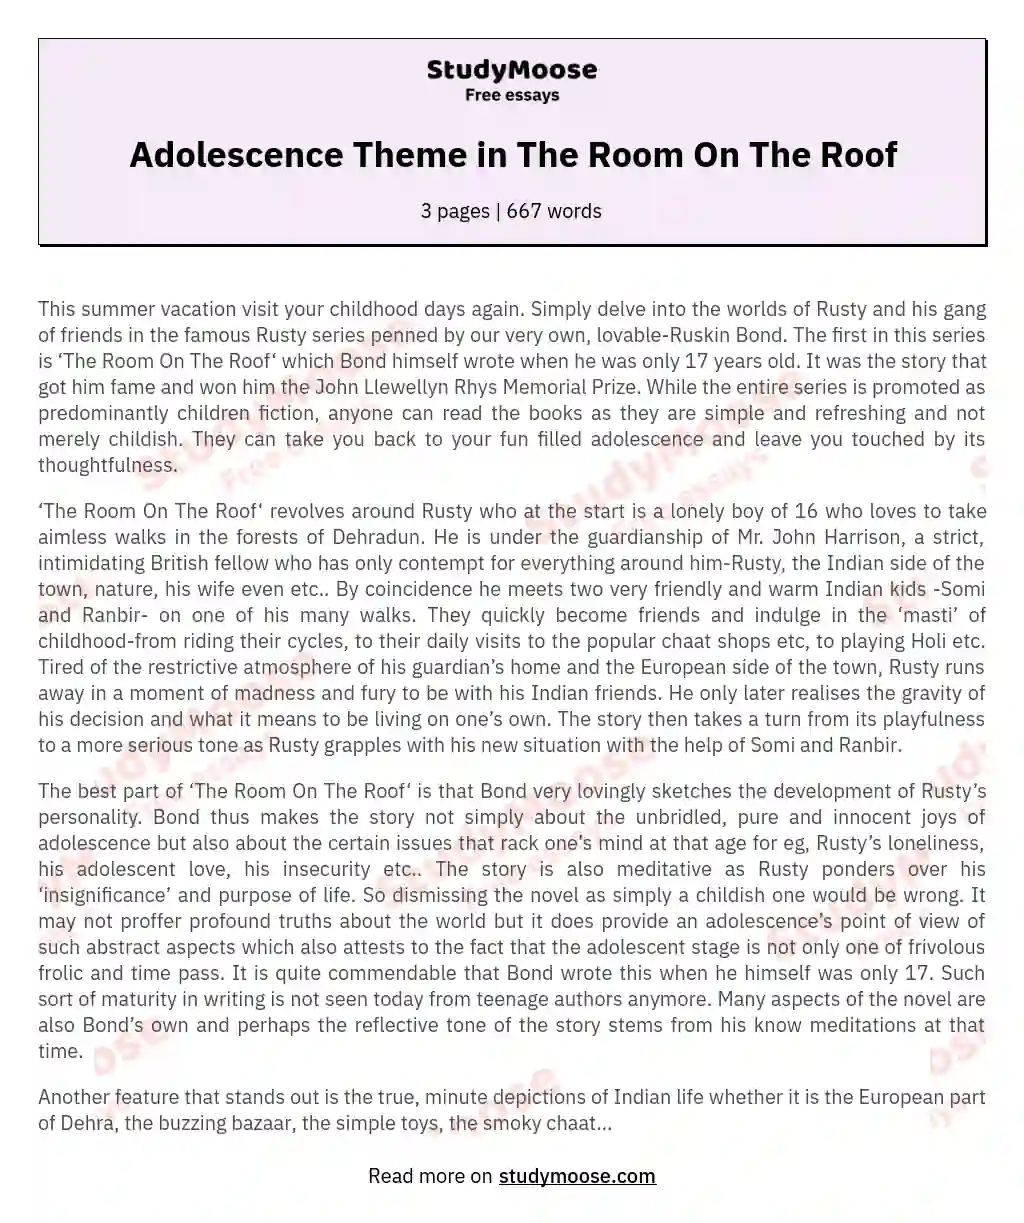 Adolescence Theme in The Room On The Roof essay